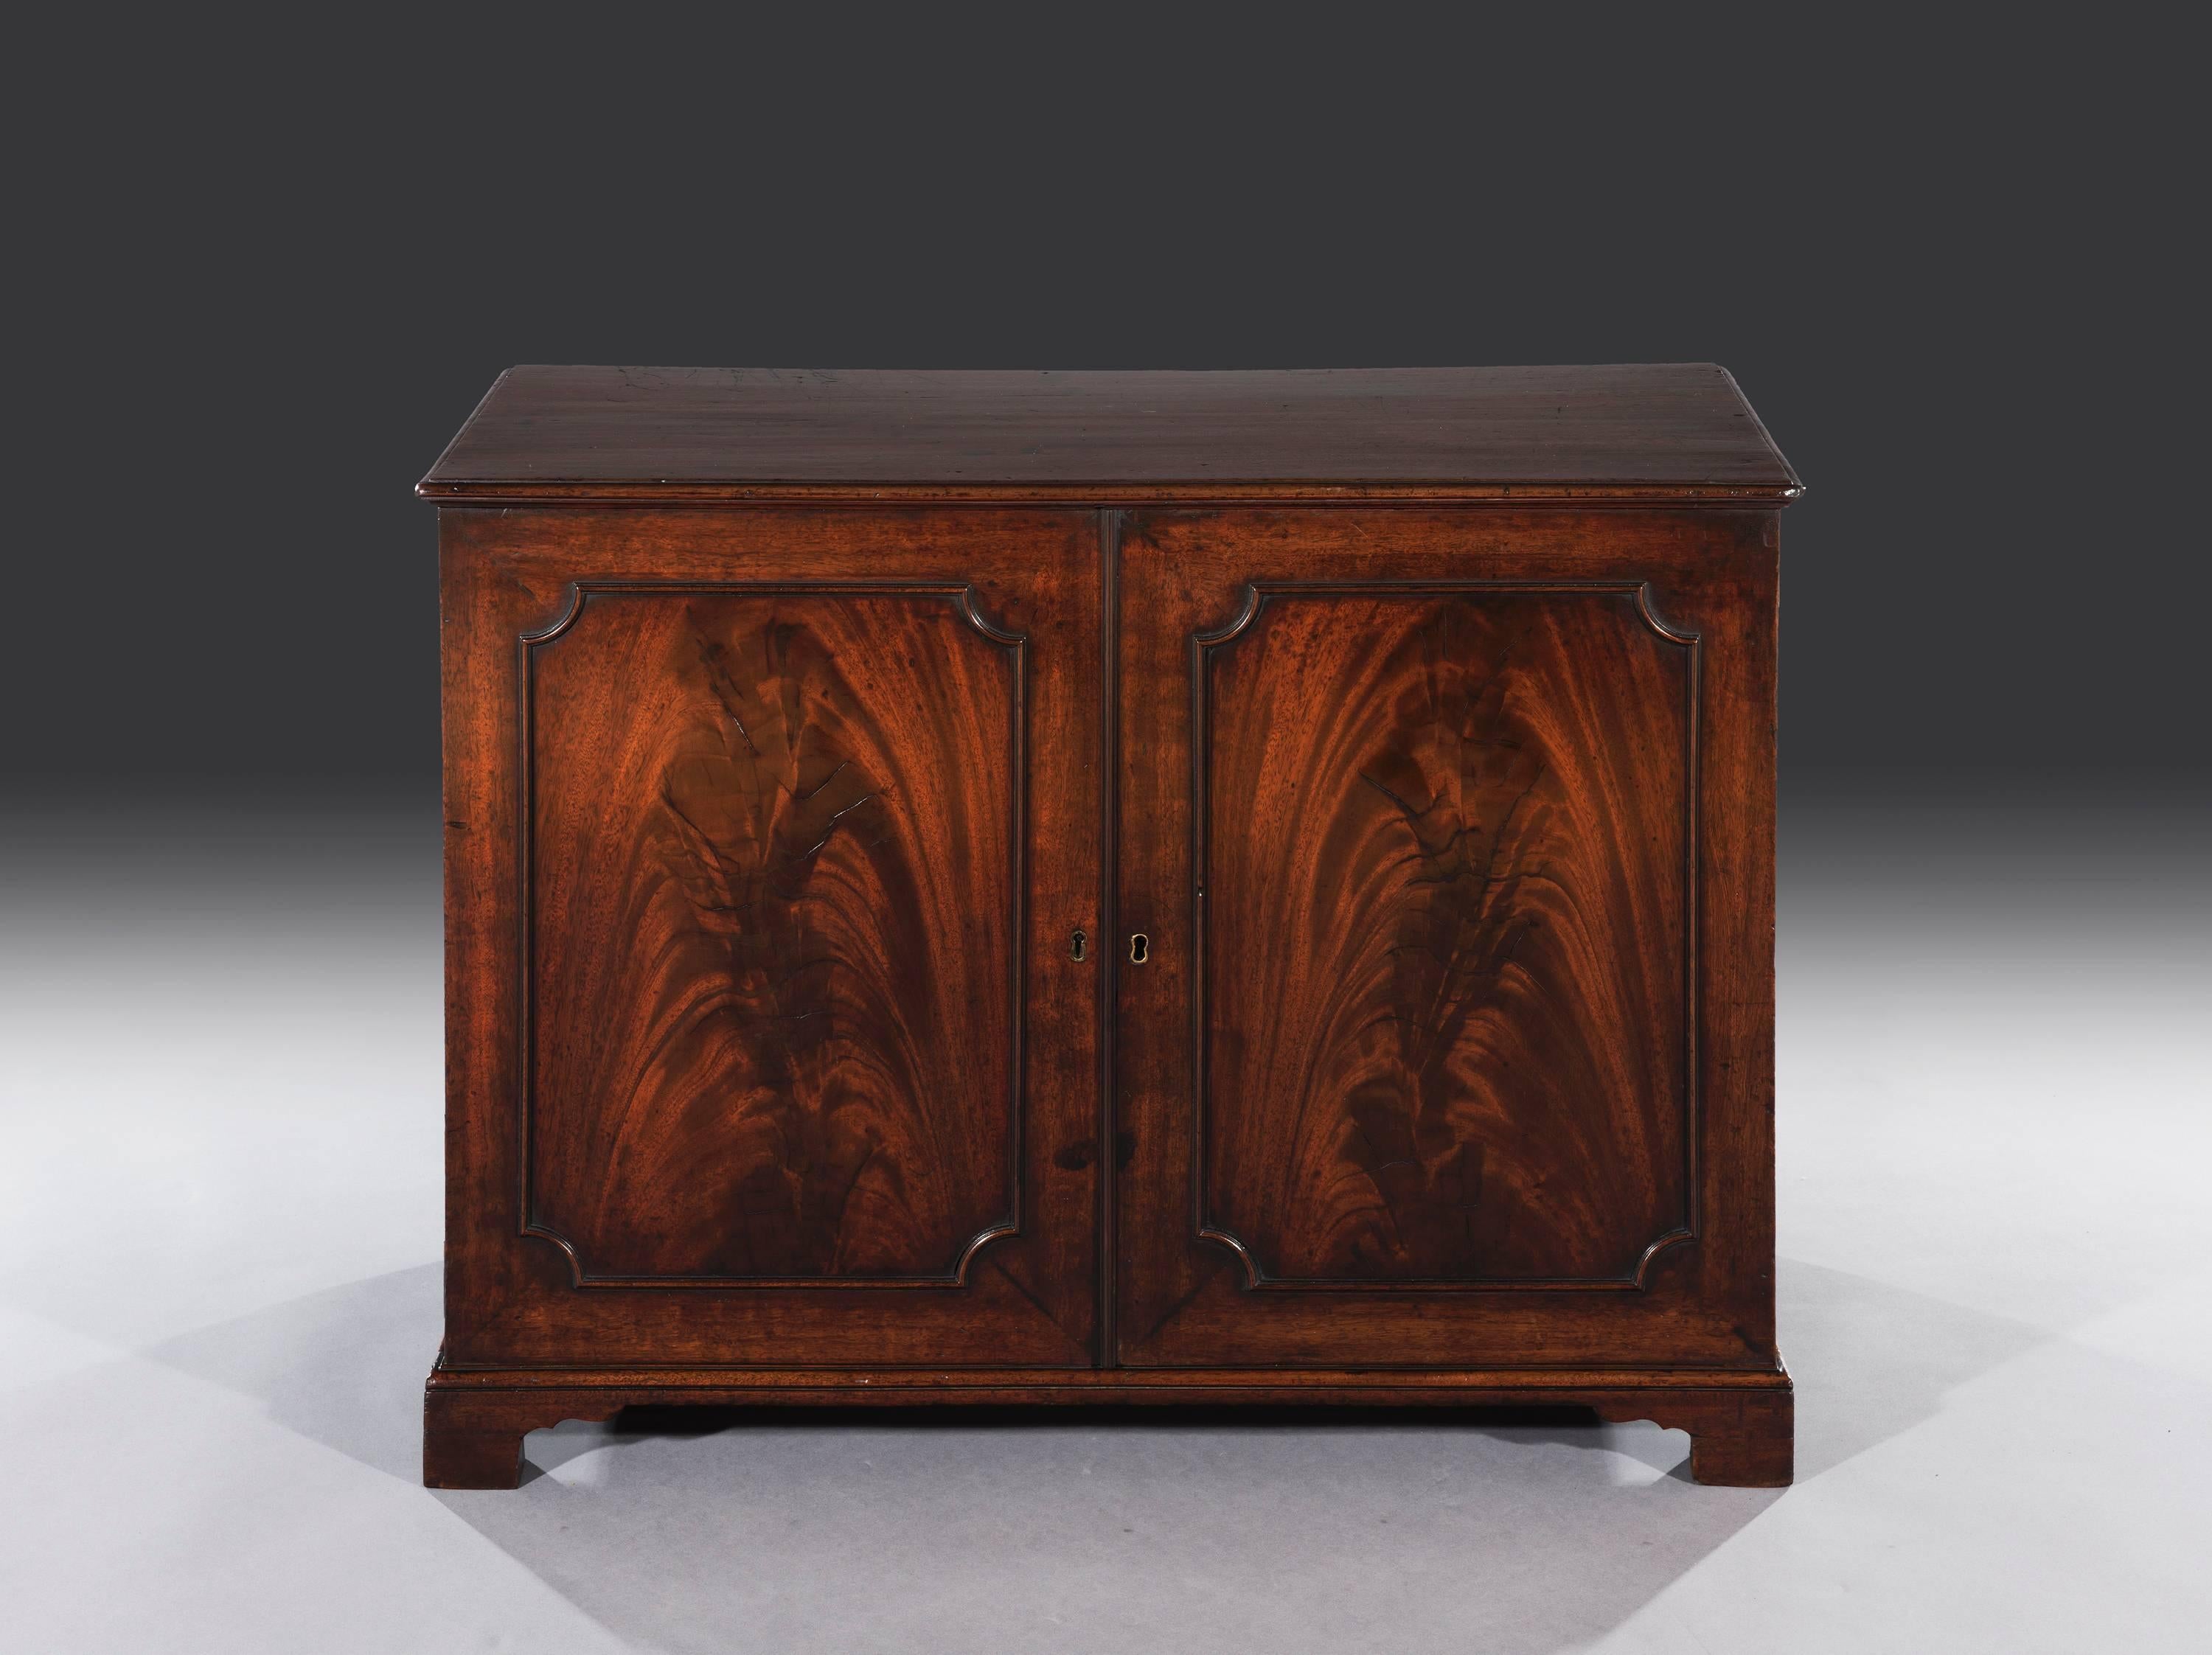 The cabinet is rare and unusual as it only stands two fee high. The mahogany moulded top sits above two flamed mahogany panelled doors which enclose a single adjustable shelf. The cabinet rests on a solid plinth moulding that sits on the four